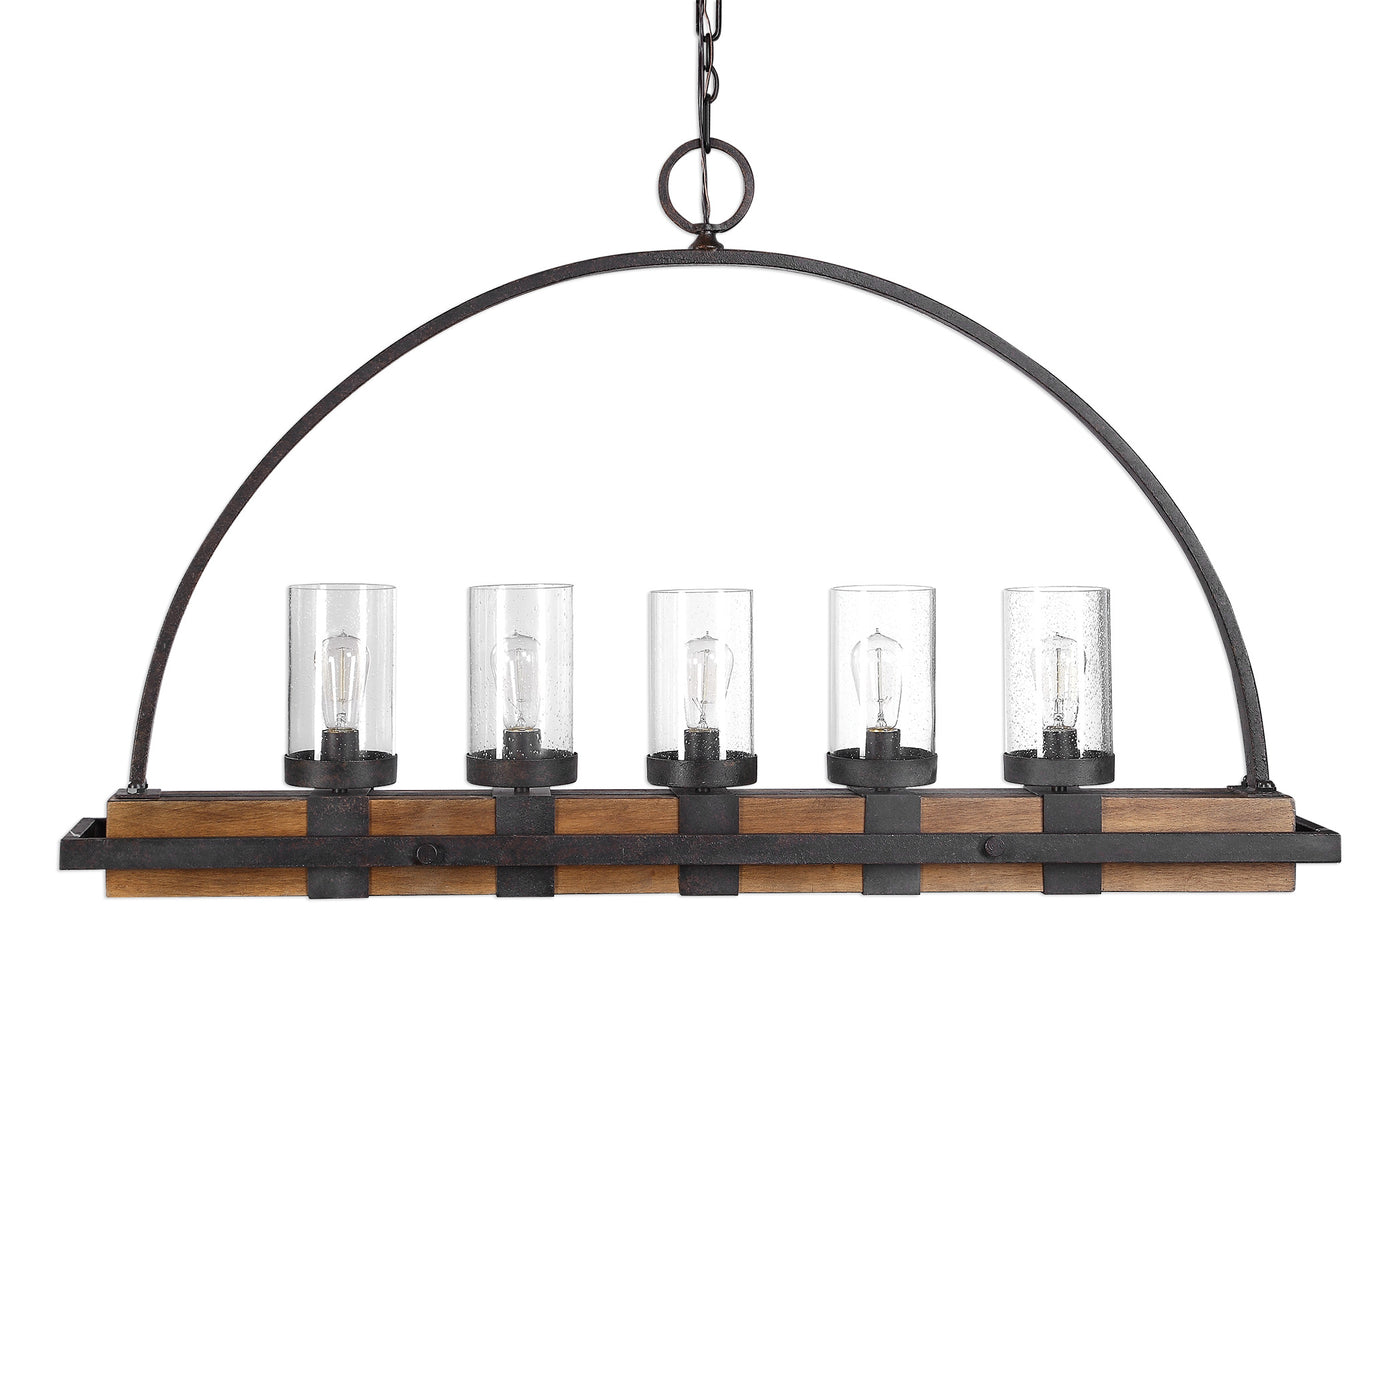 Heavy Gauge Real Wood Linear Body, Finished In A Mid-tone, Featuring Clear Seeded Glass Shades. A Nod To Industrial Design...